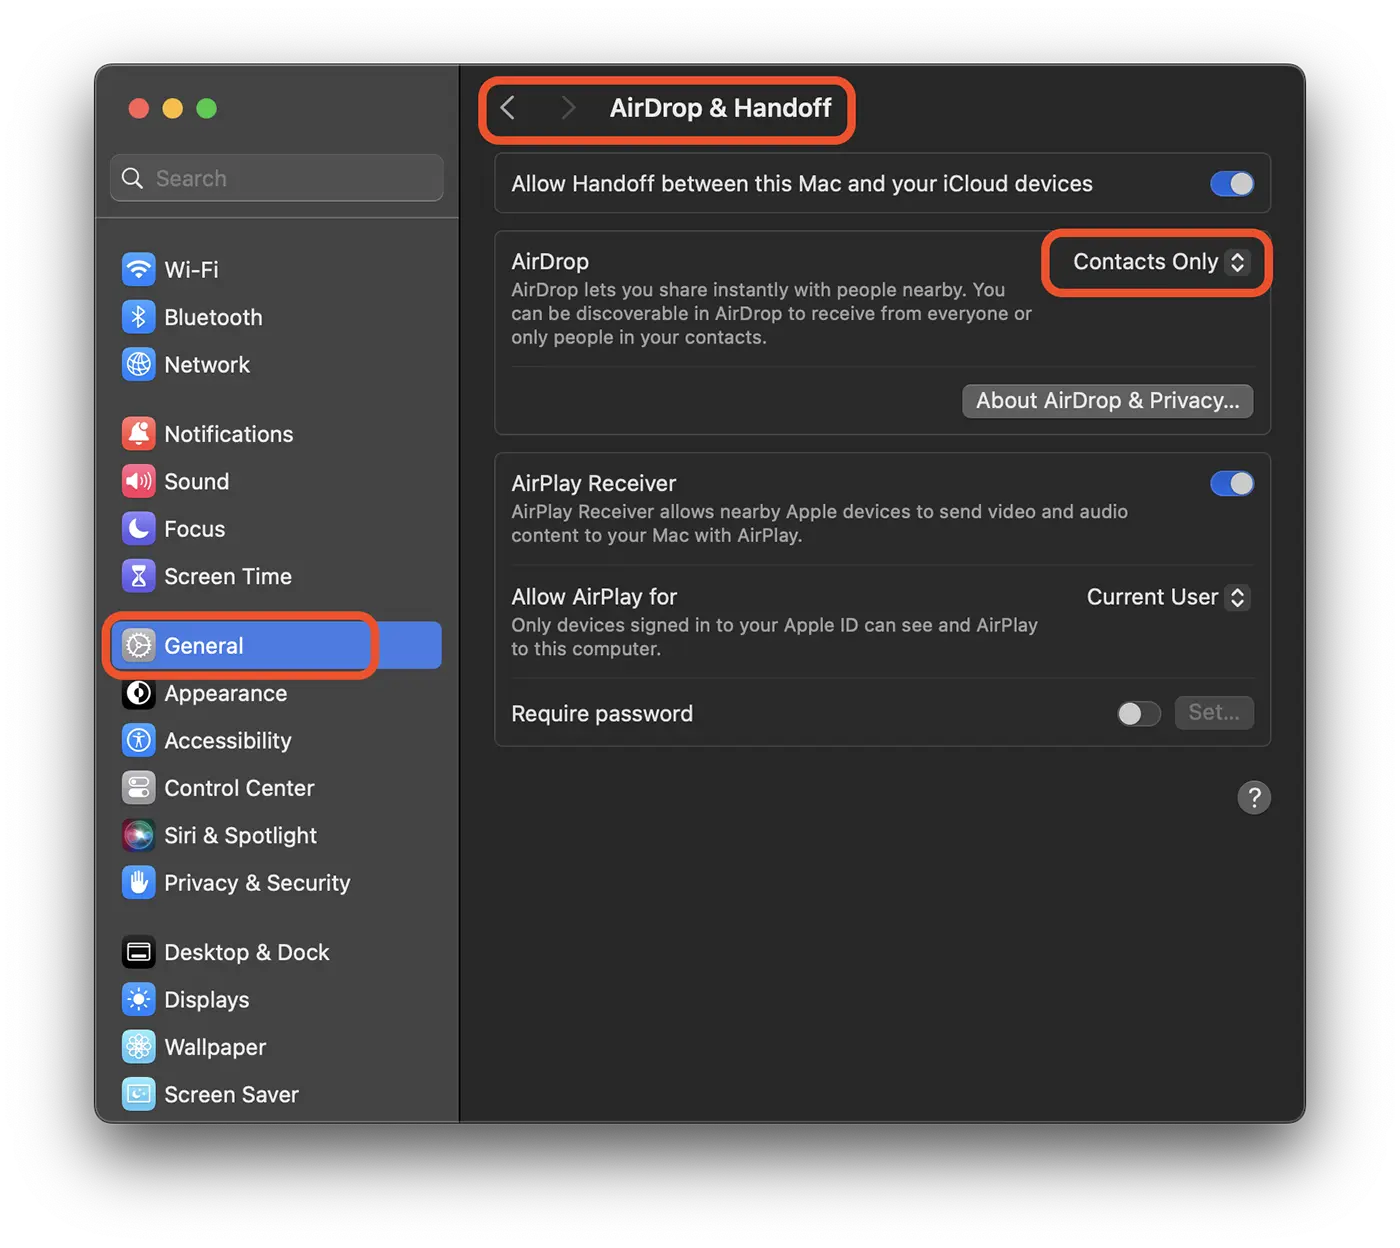 Enable AirDrop on macOS